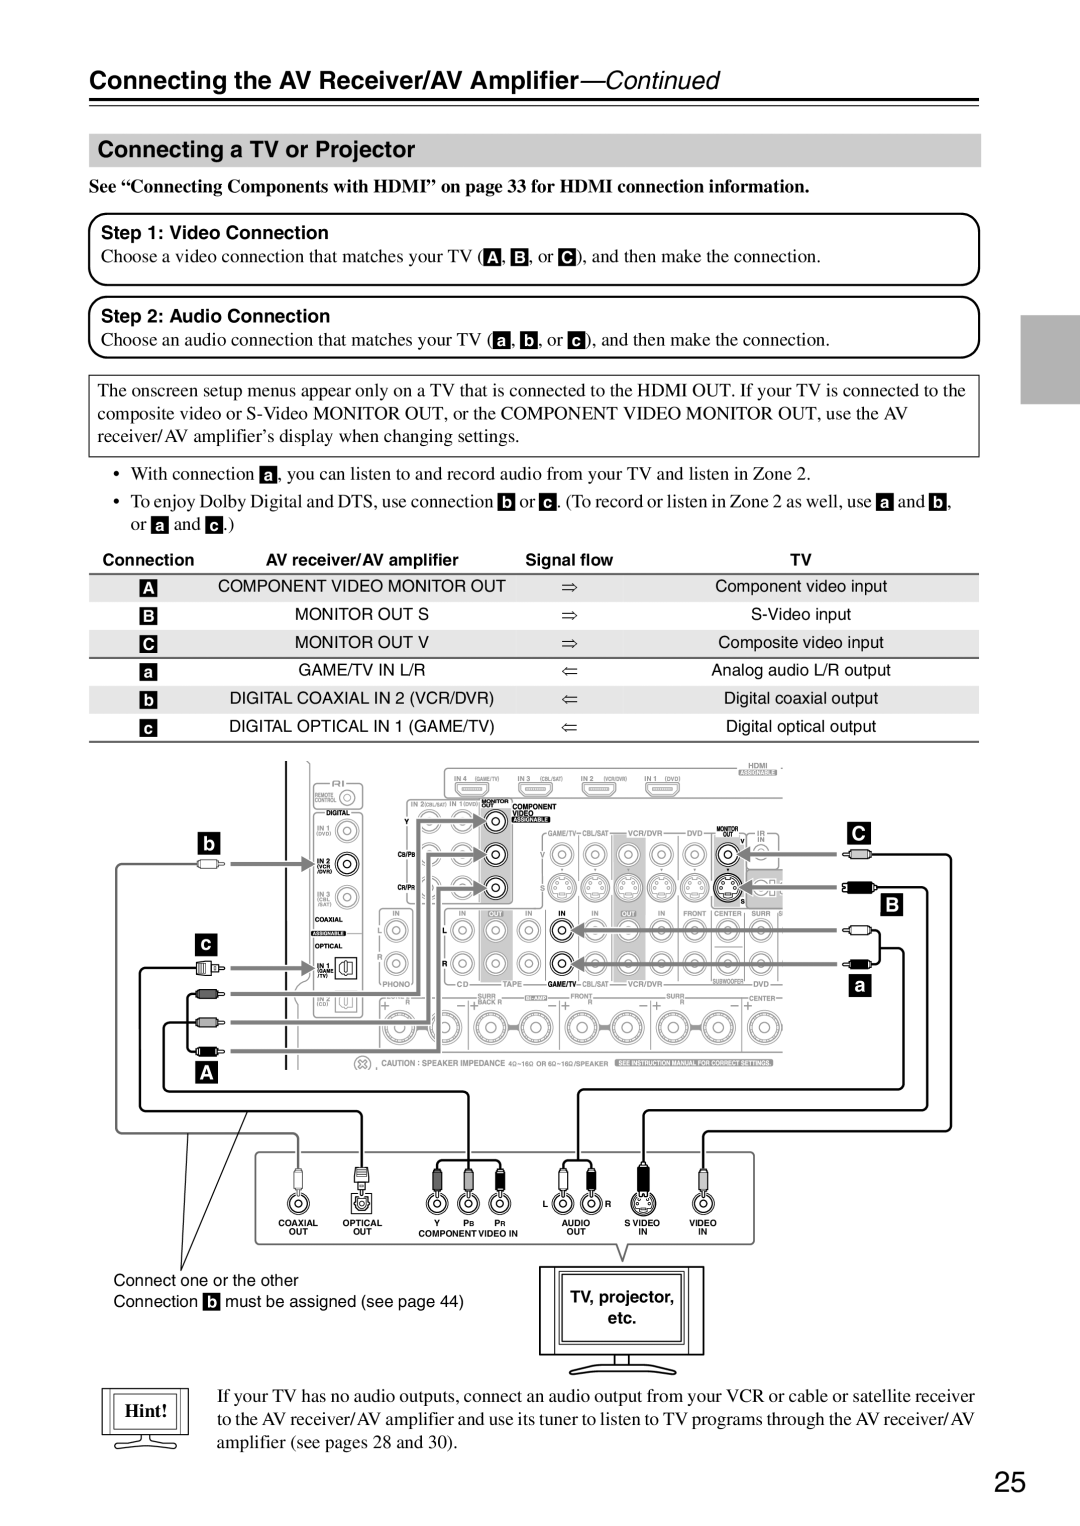 Onkyo TX-SA706 instruction manual Connecting a TV or Projector, Connecting the AV Receiver/AV Amplifier—Continued, Hint 